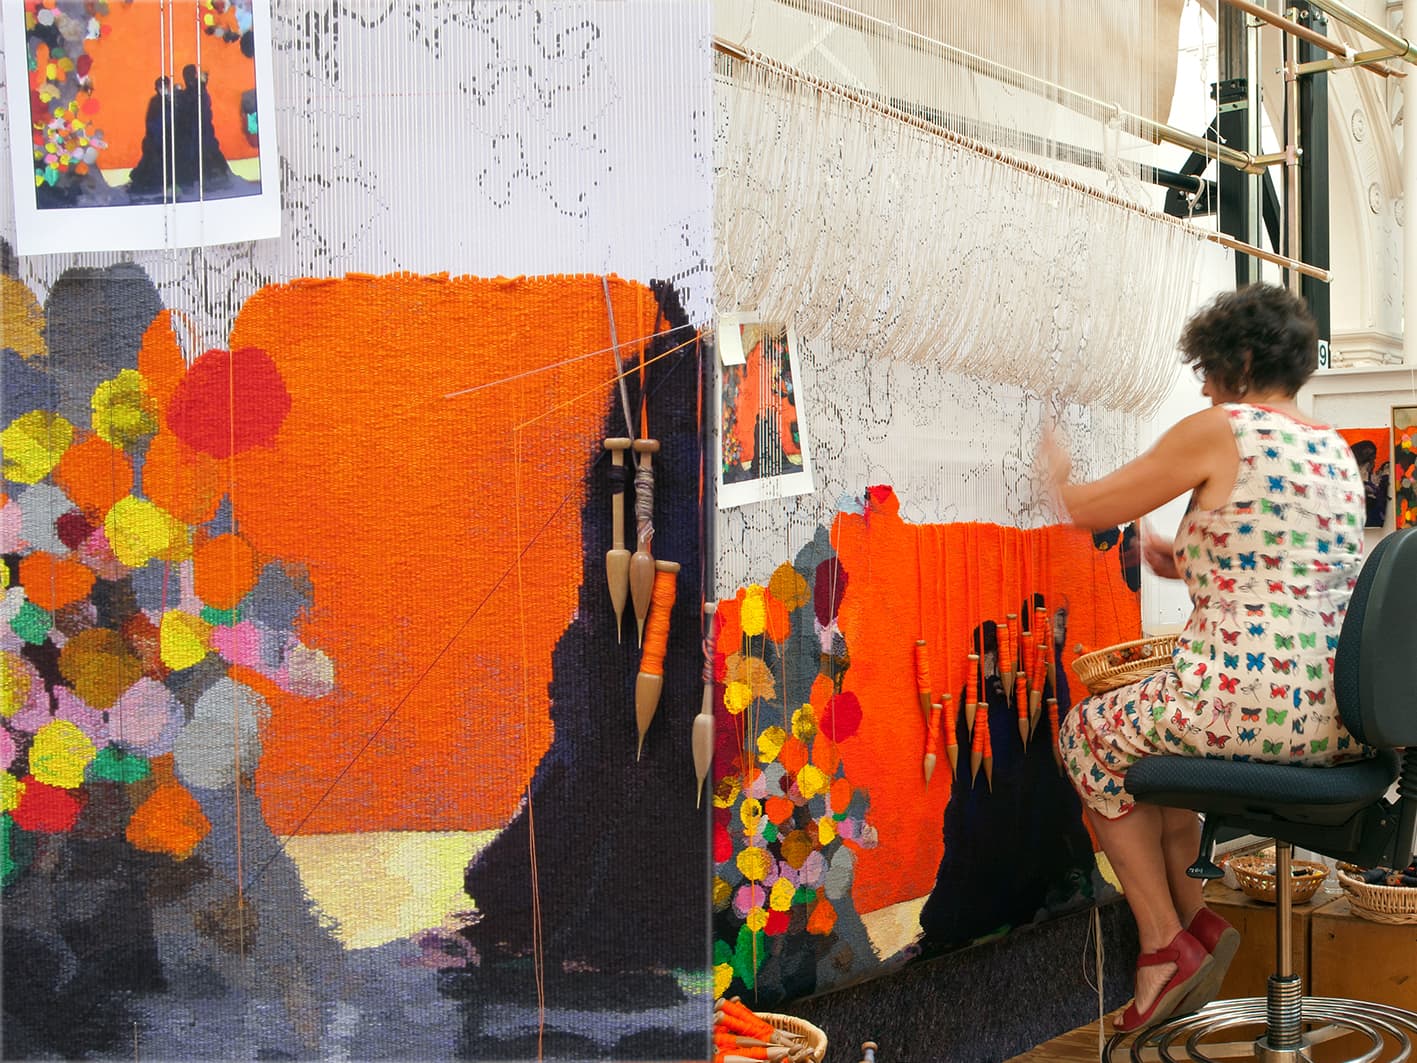 Left: Detail of ‘Rome’ designed by Brent Harris in 2012 and woven by Sue Batten. Right: ATW weaver Sue Batten working on 'Rome' designed by Brent Harris in 2012. Photographs: Viki Petherbridge.